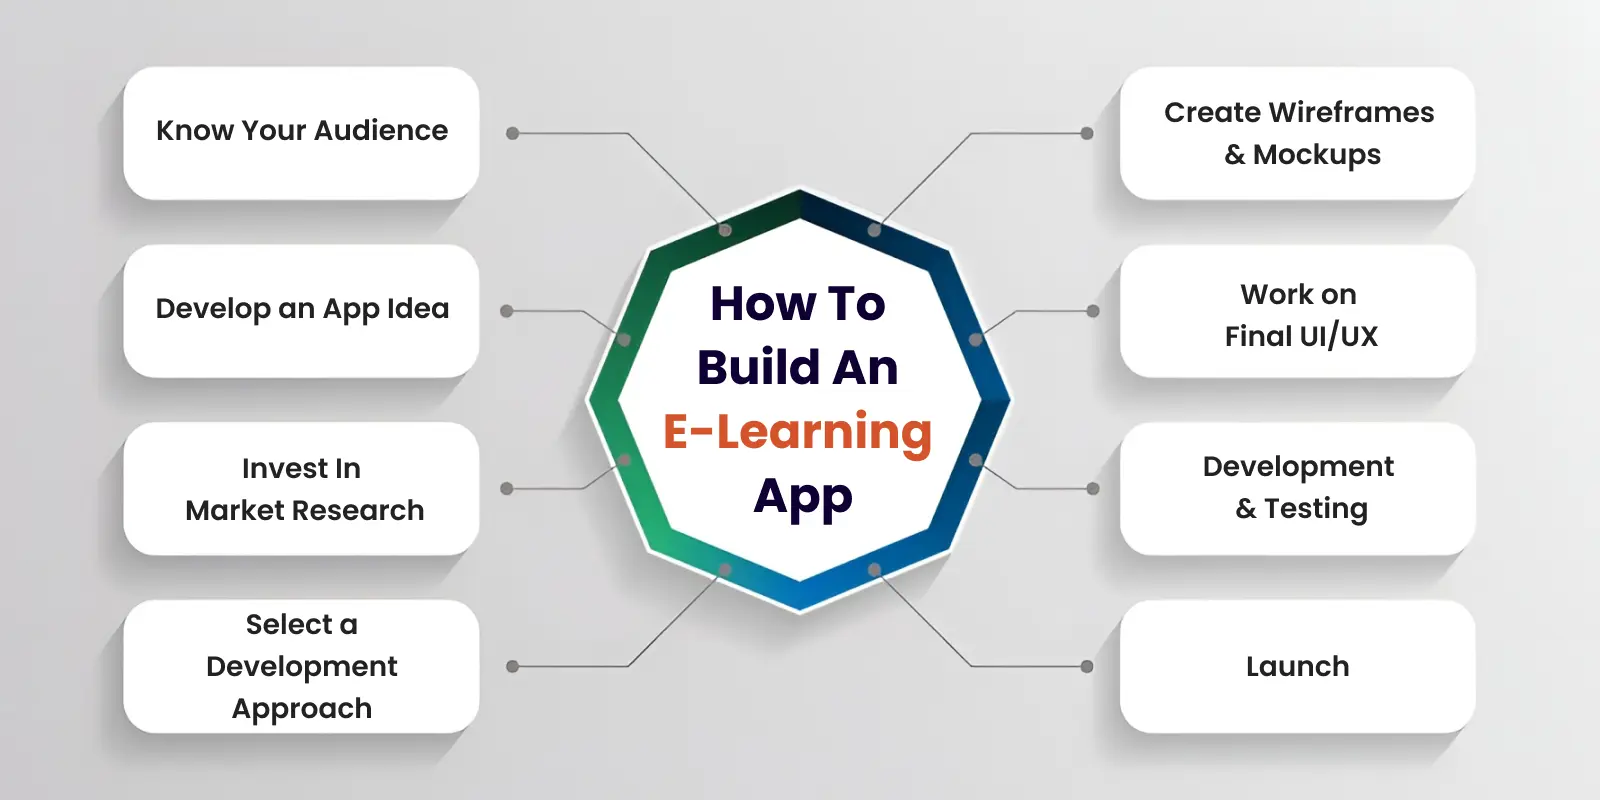 How To Build An E-Learning App?